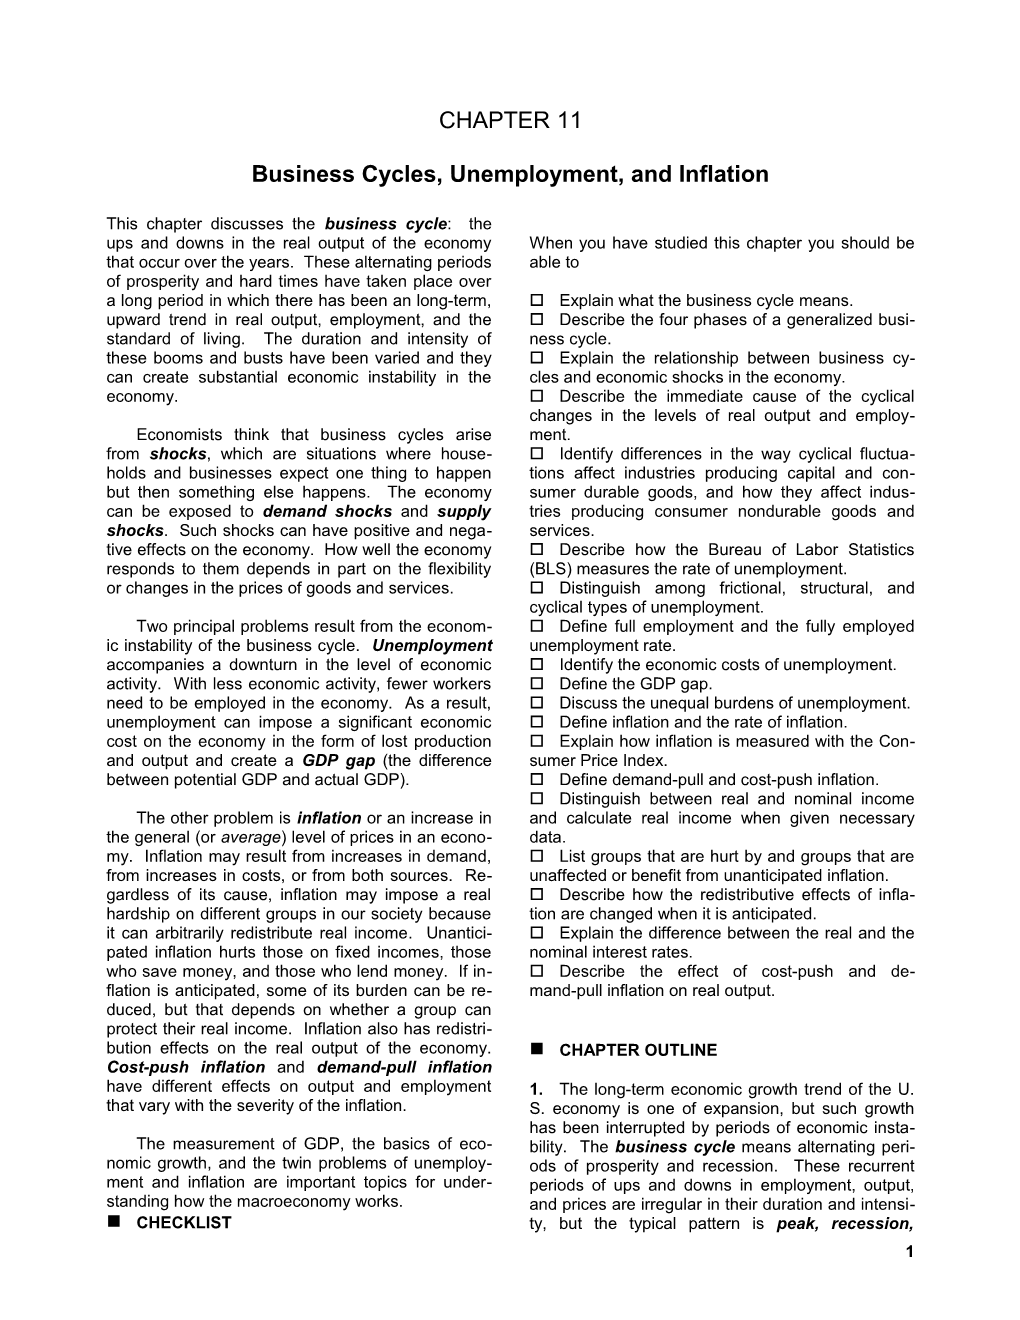 Business Cycles, Unemployment, and Inflation s1